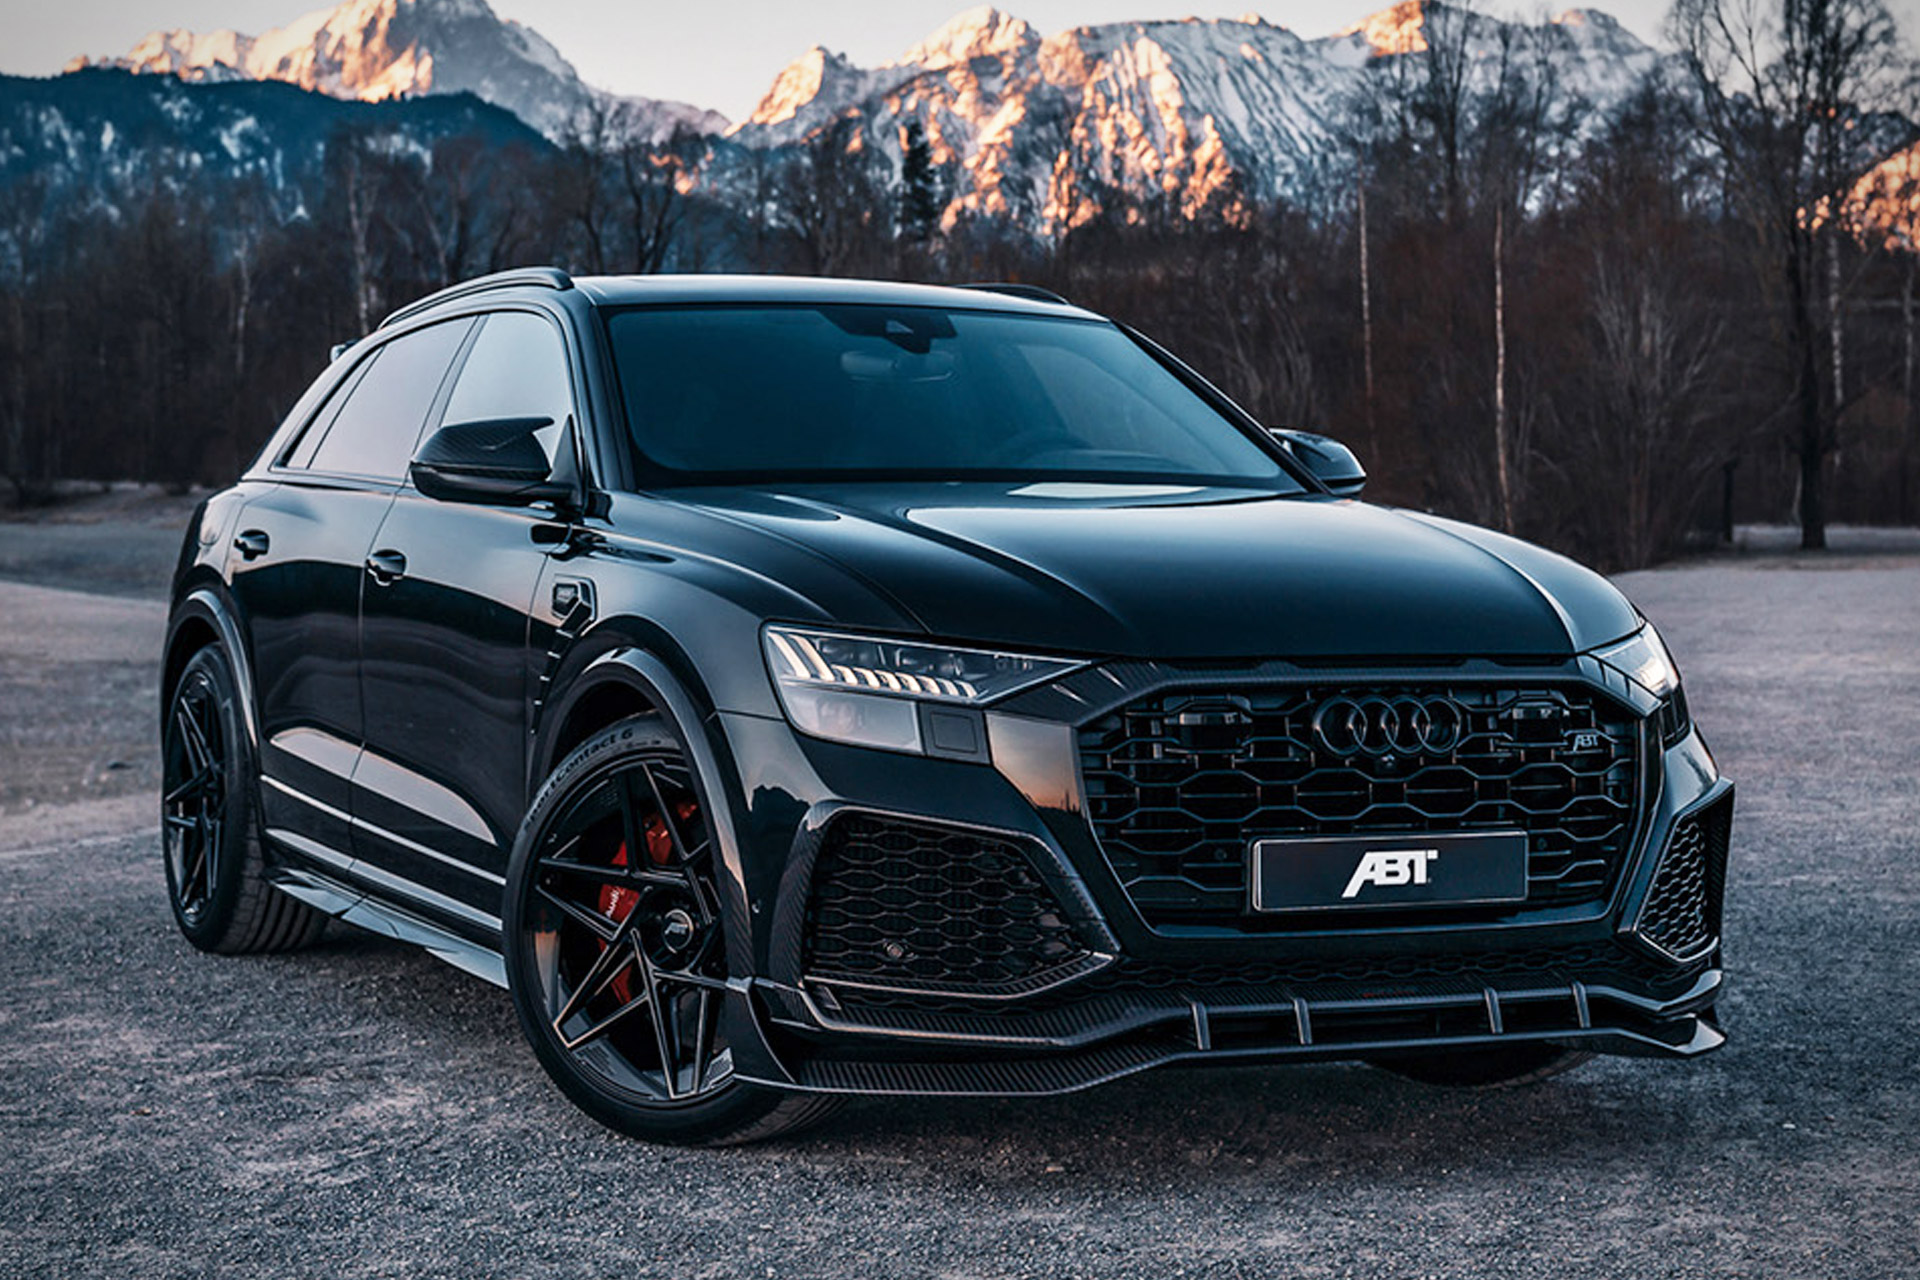 2023 ABT Sportsline Audi RSQ8 SUV | Uncrate